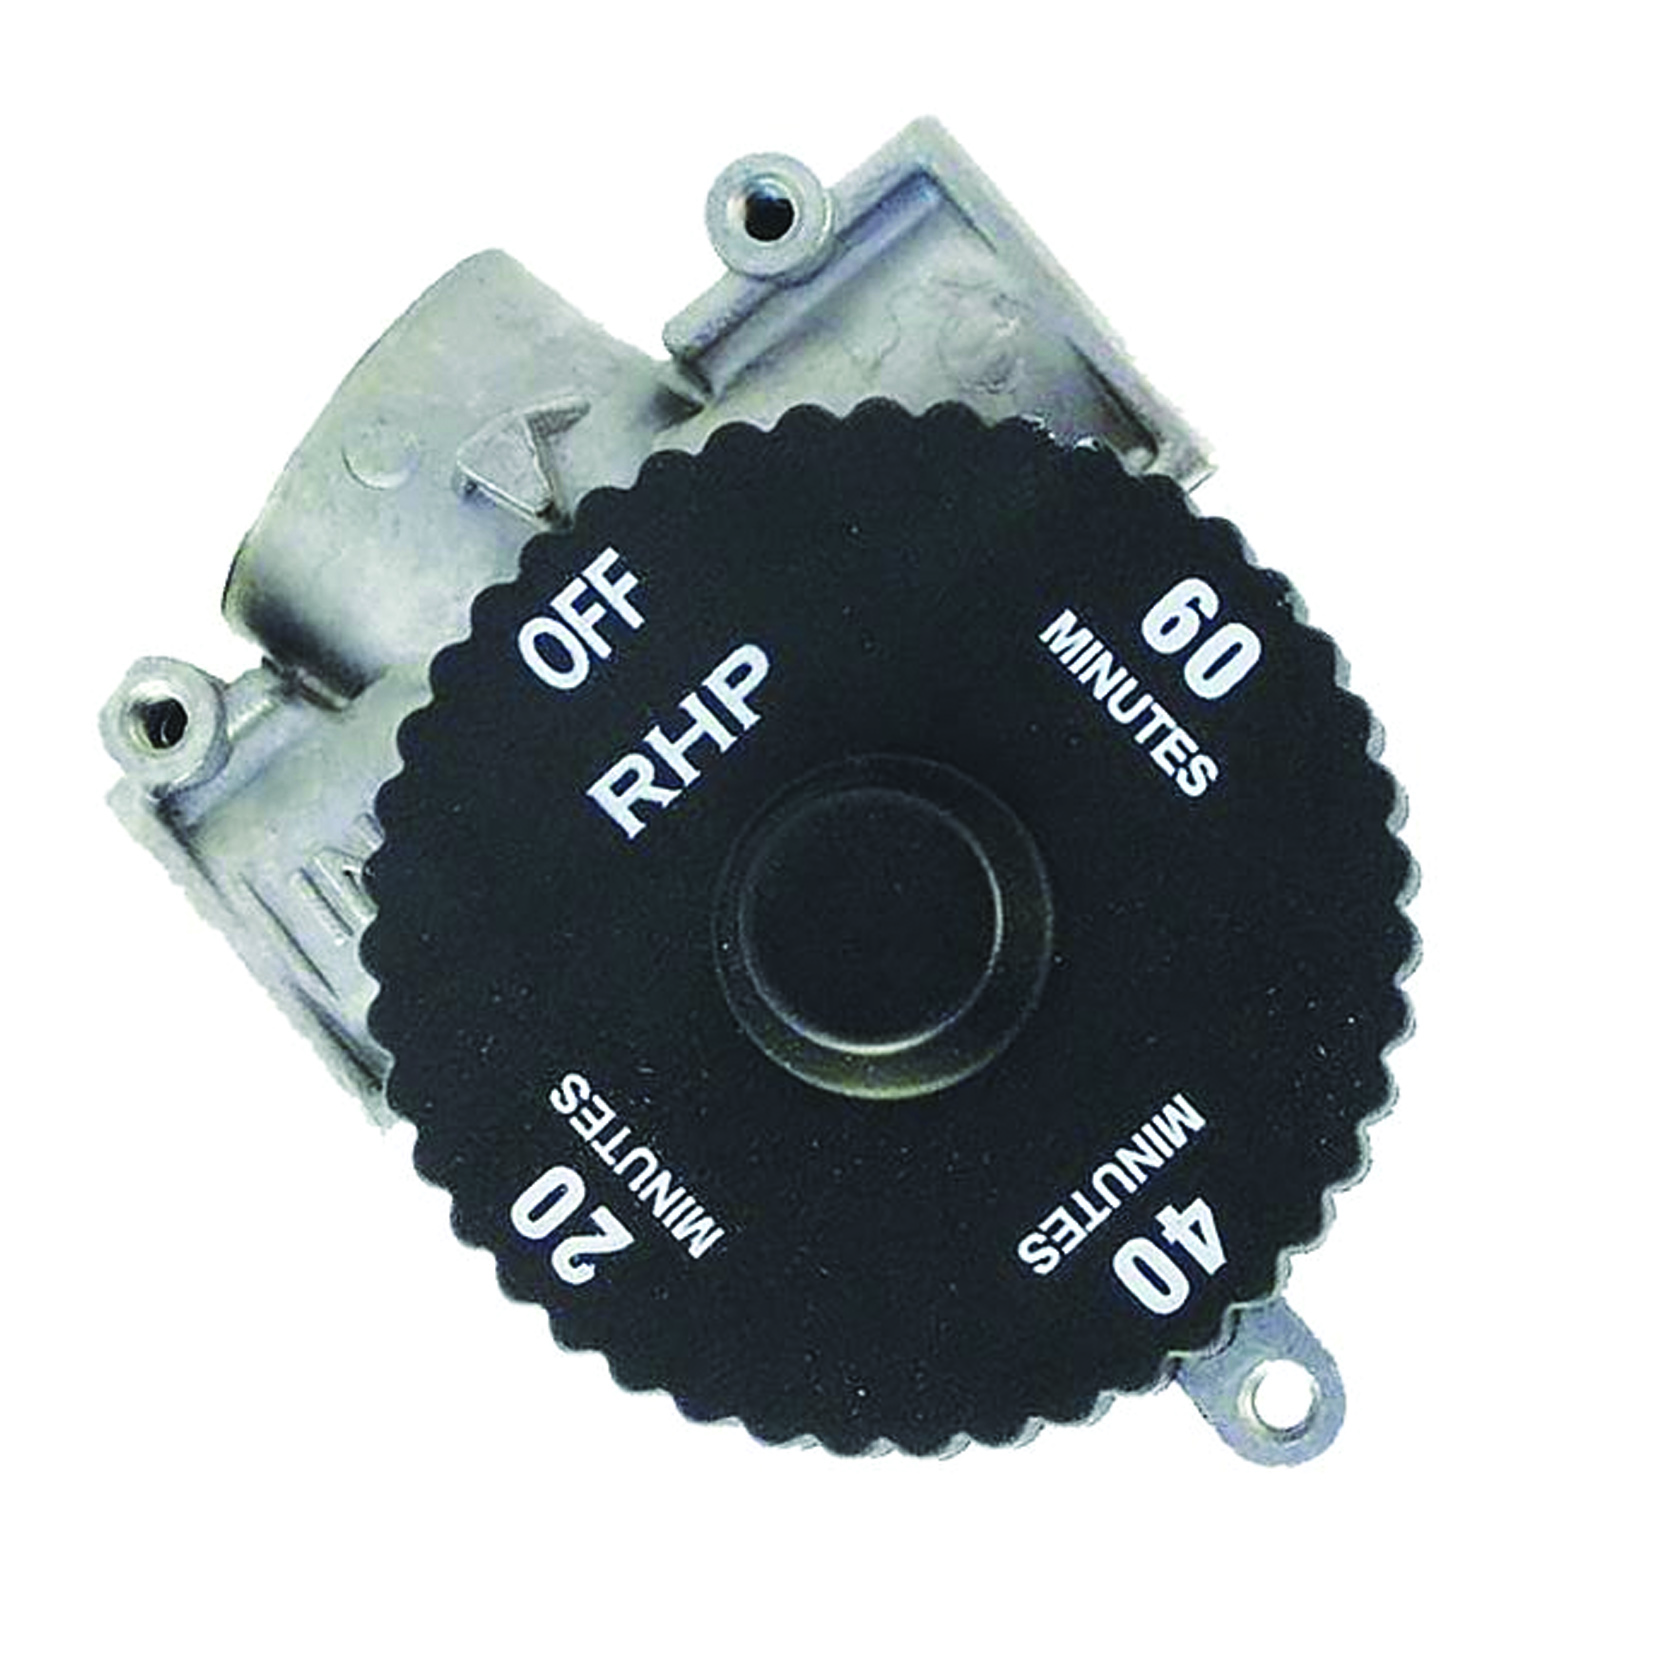 PETE3092<br/>Gas Timer<br/>1/2 PSI - 1 Hour